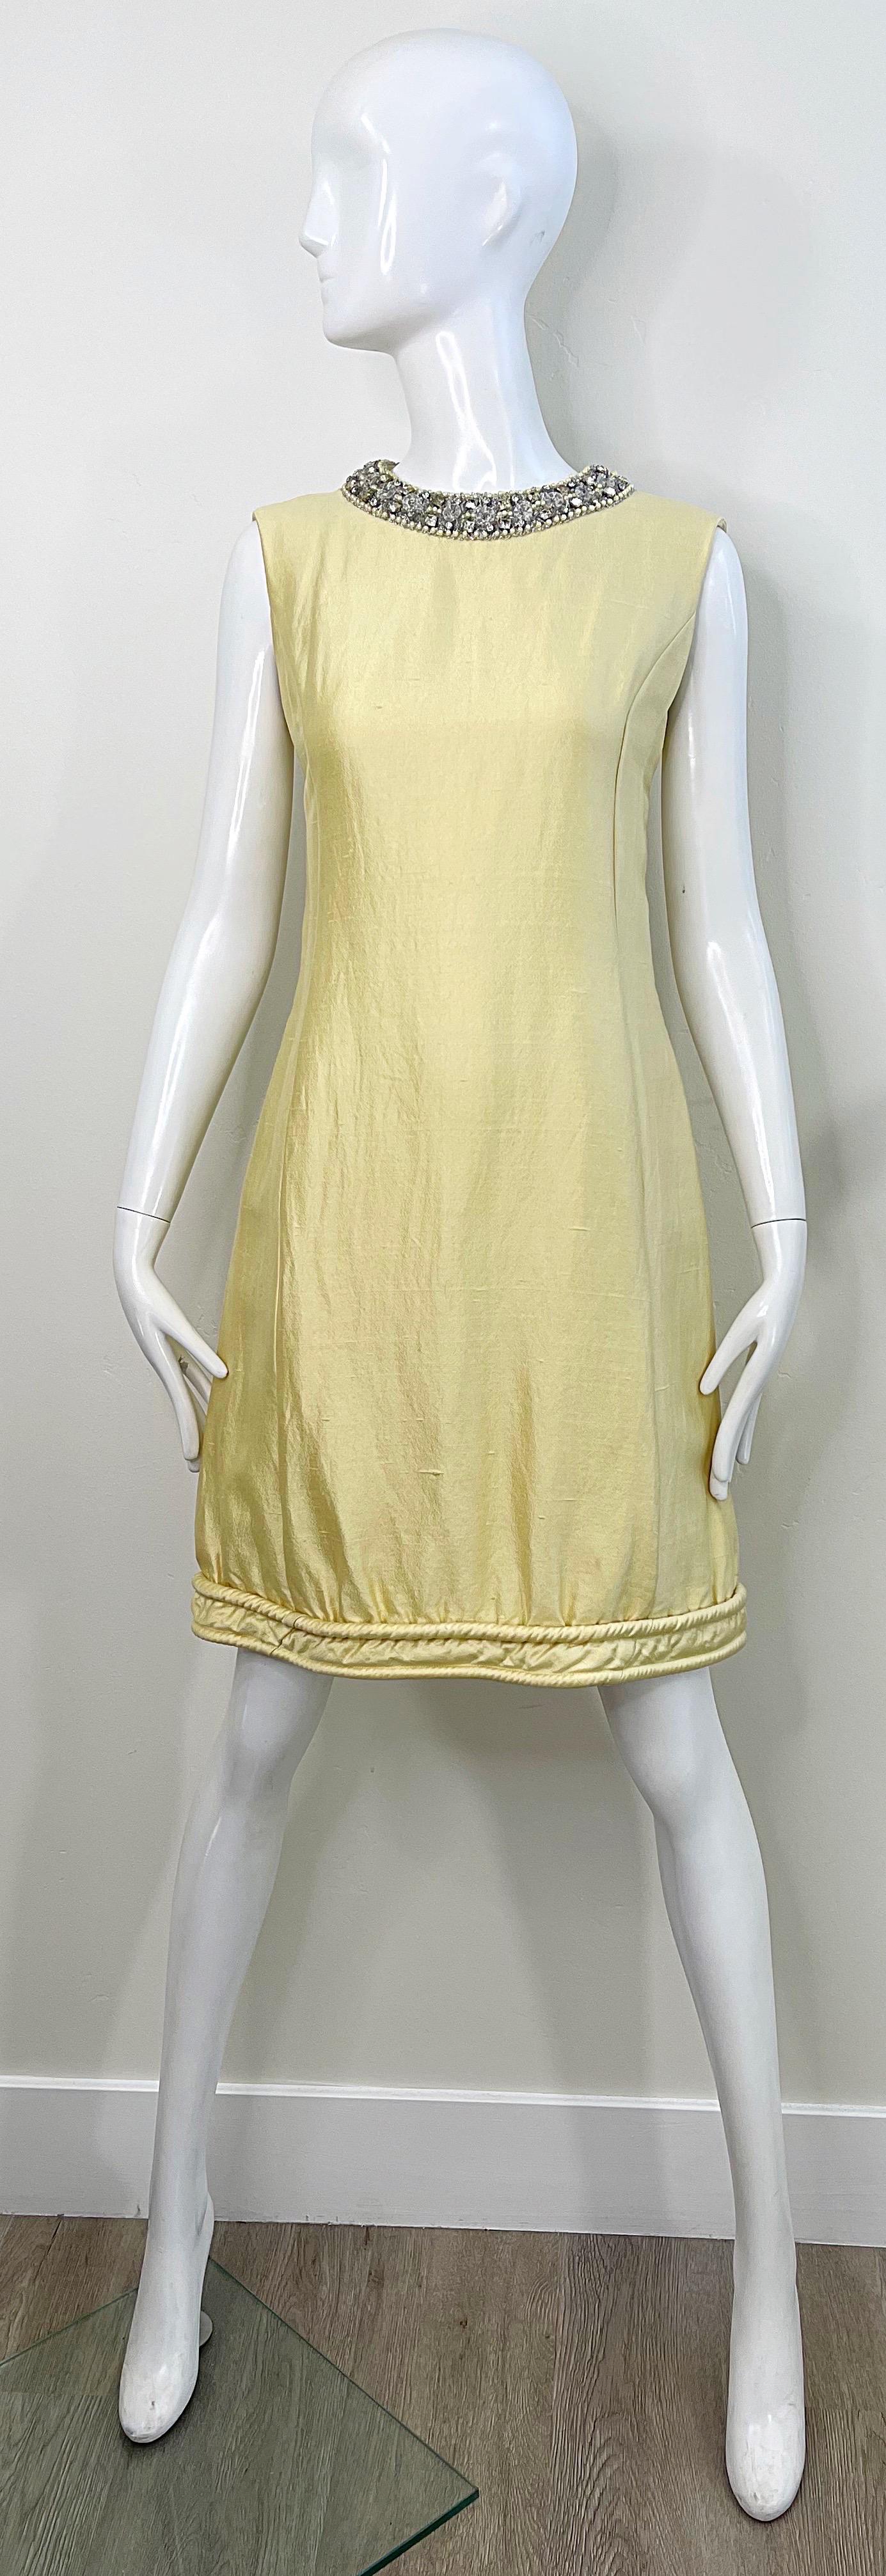 Chic 1960s Pale Yellow Silk Shantung Rhinestone Beaded Vintage 60s Shift Dress For Sale 7